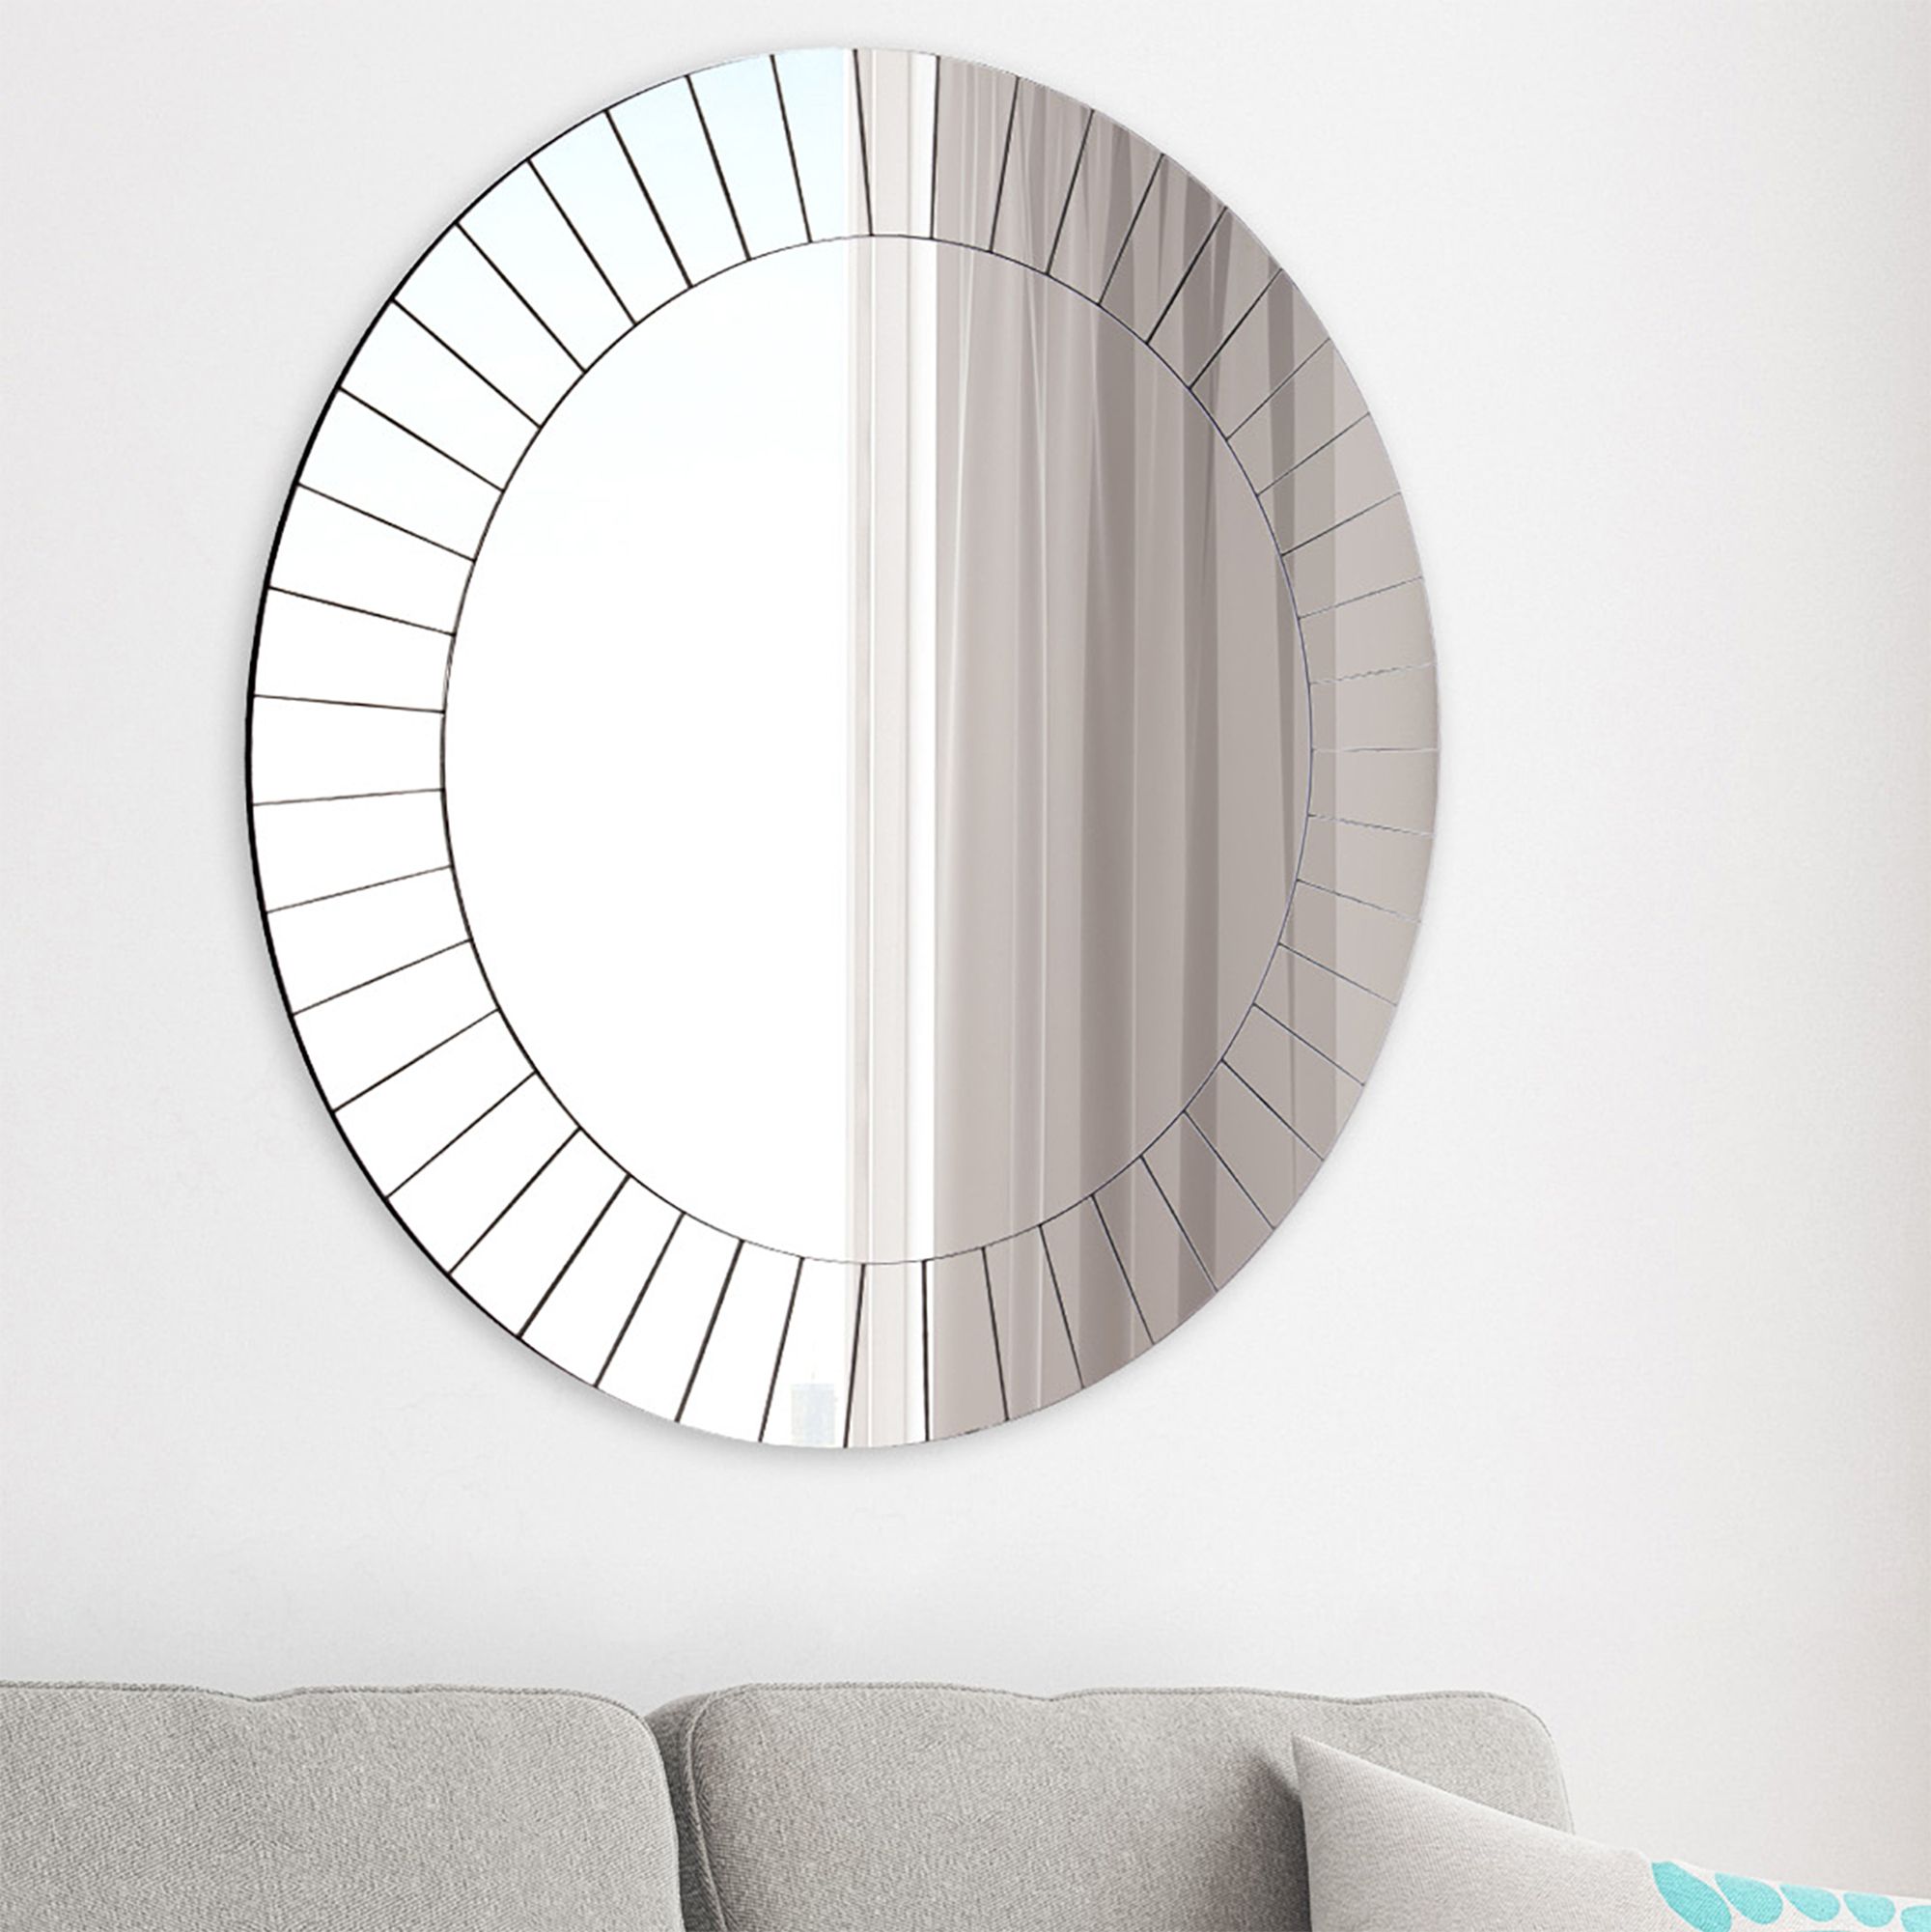 Frameless Beveled Round Wall Mirror 26"x26"gallery Solutions For Tetbury Frameless Tri Bevel Wall Mirrors (View 3 of 15)